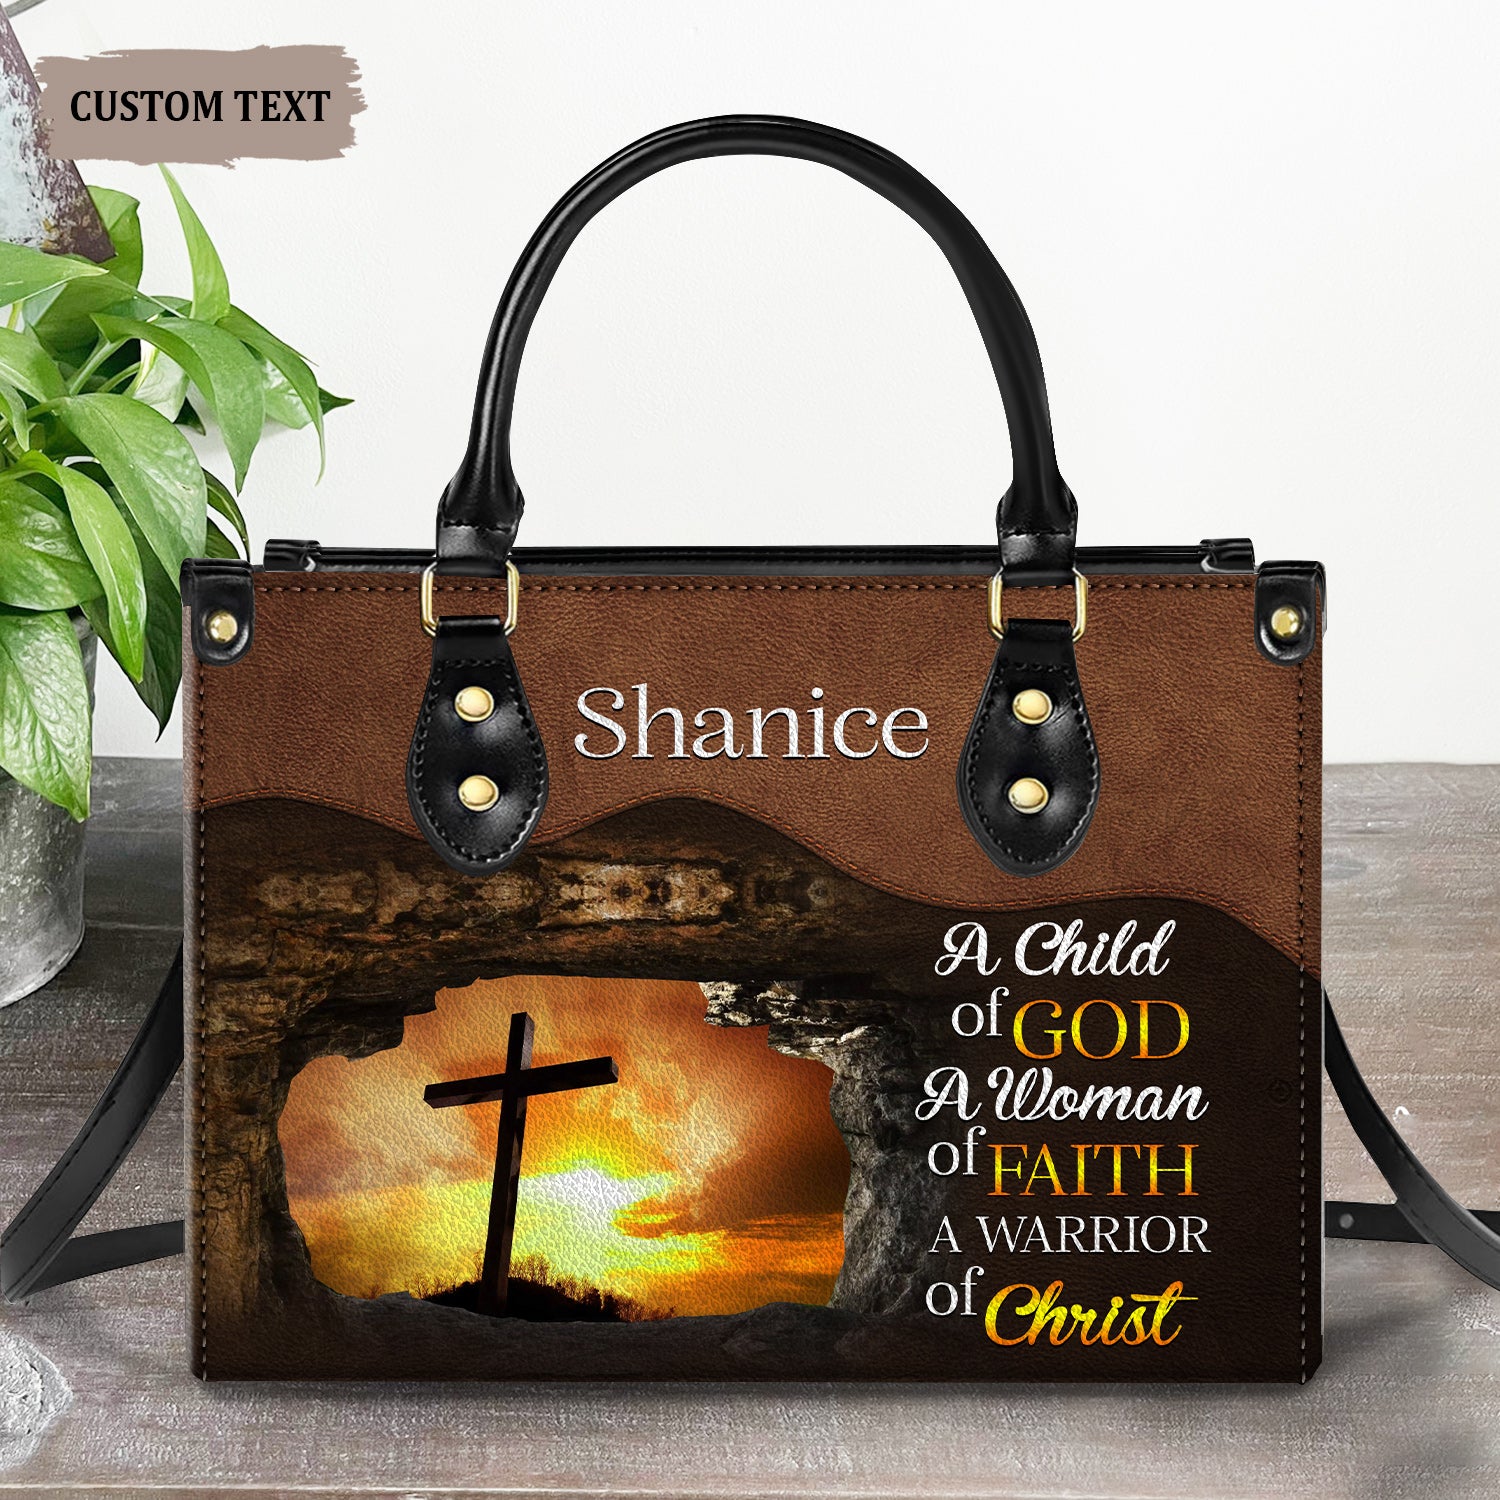 A Child Of God, A Woman Of Faith, A Warrior Of Christ Personalized Leather Handbag